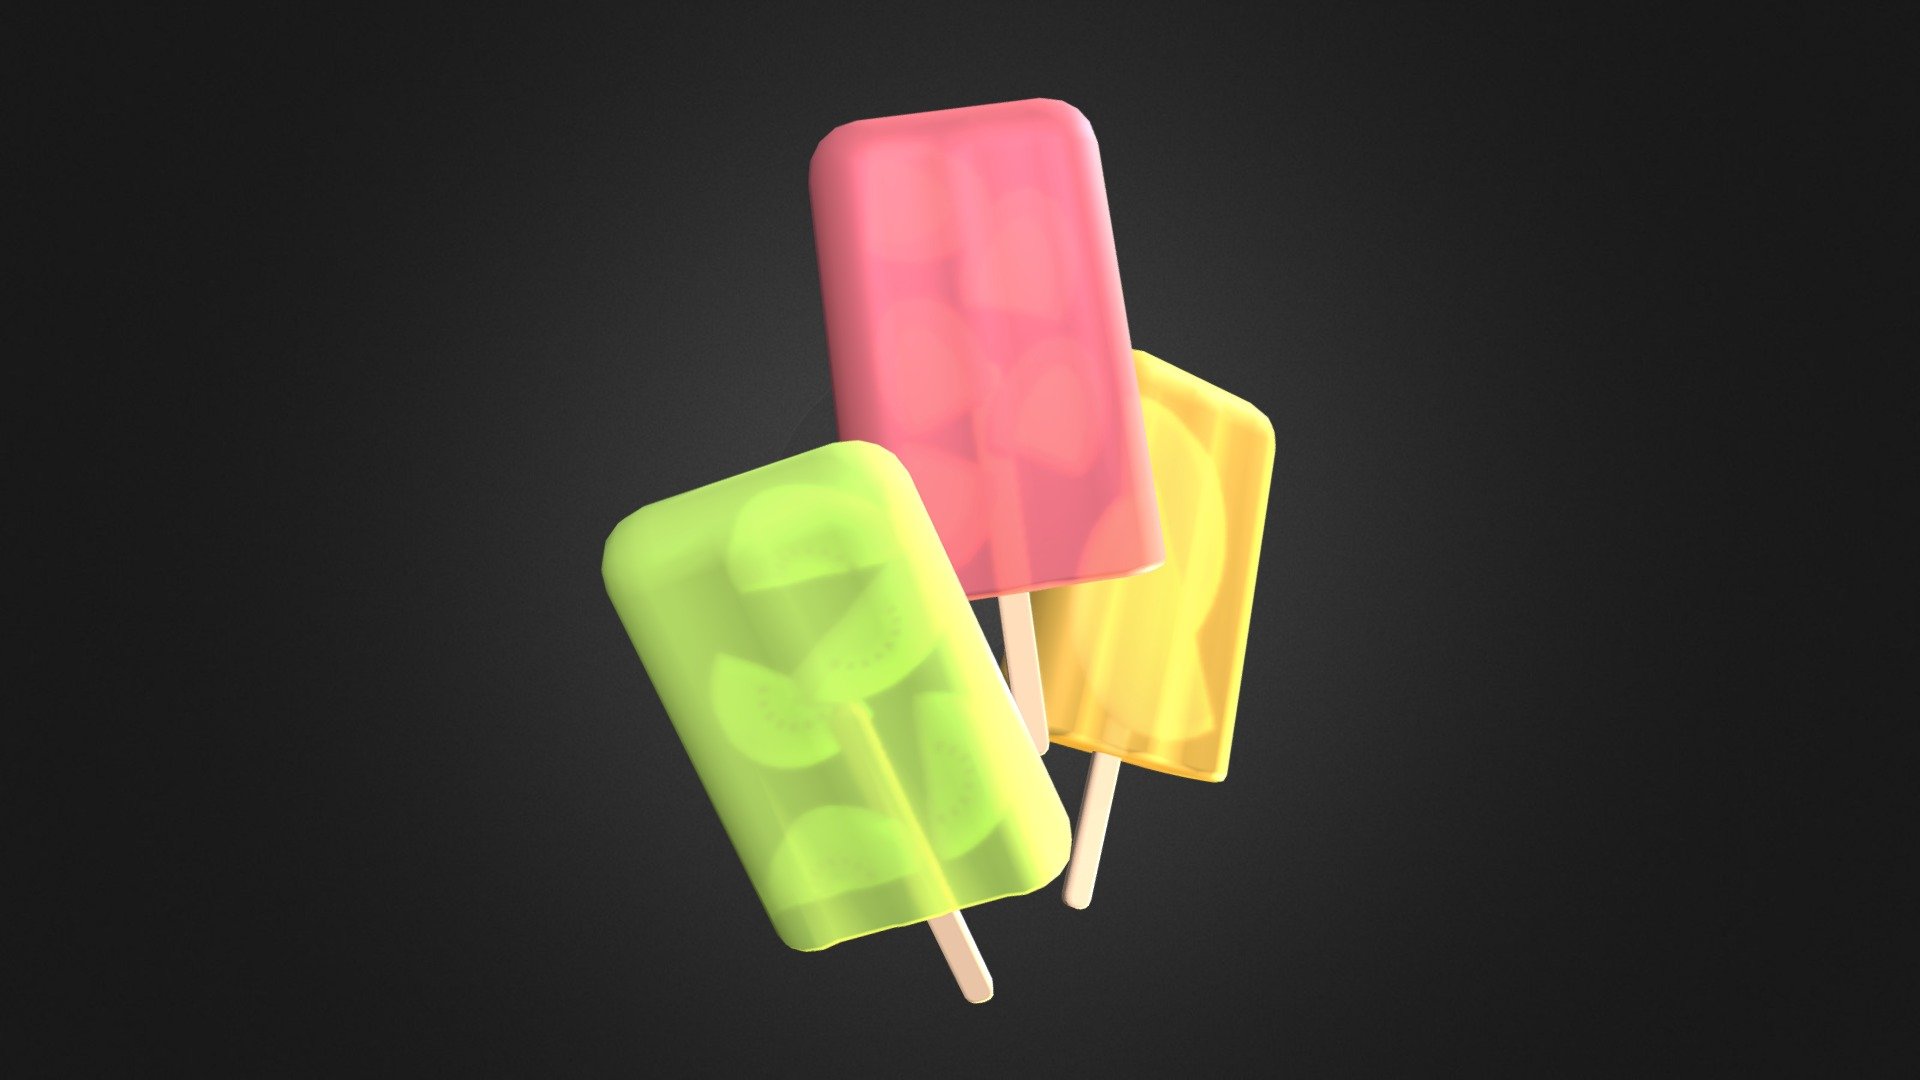 Just some quick fruity ice pops since it's actually been quite warm lately! - Summer Pops - 3D model by Nicole "CmdrSpaceCat" Rusk (@cmdrspacecat) 3d model